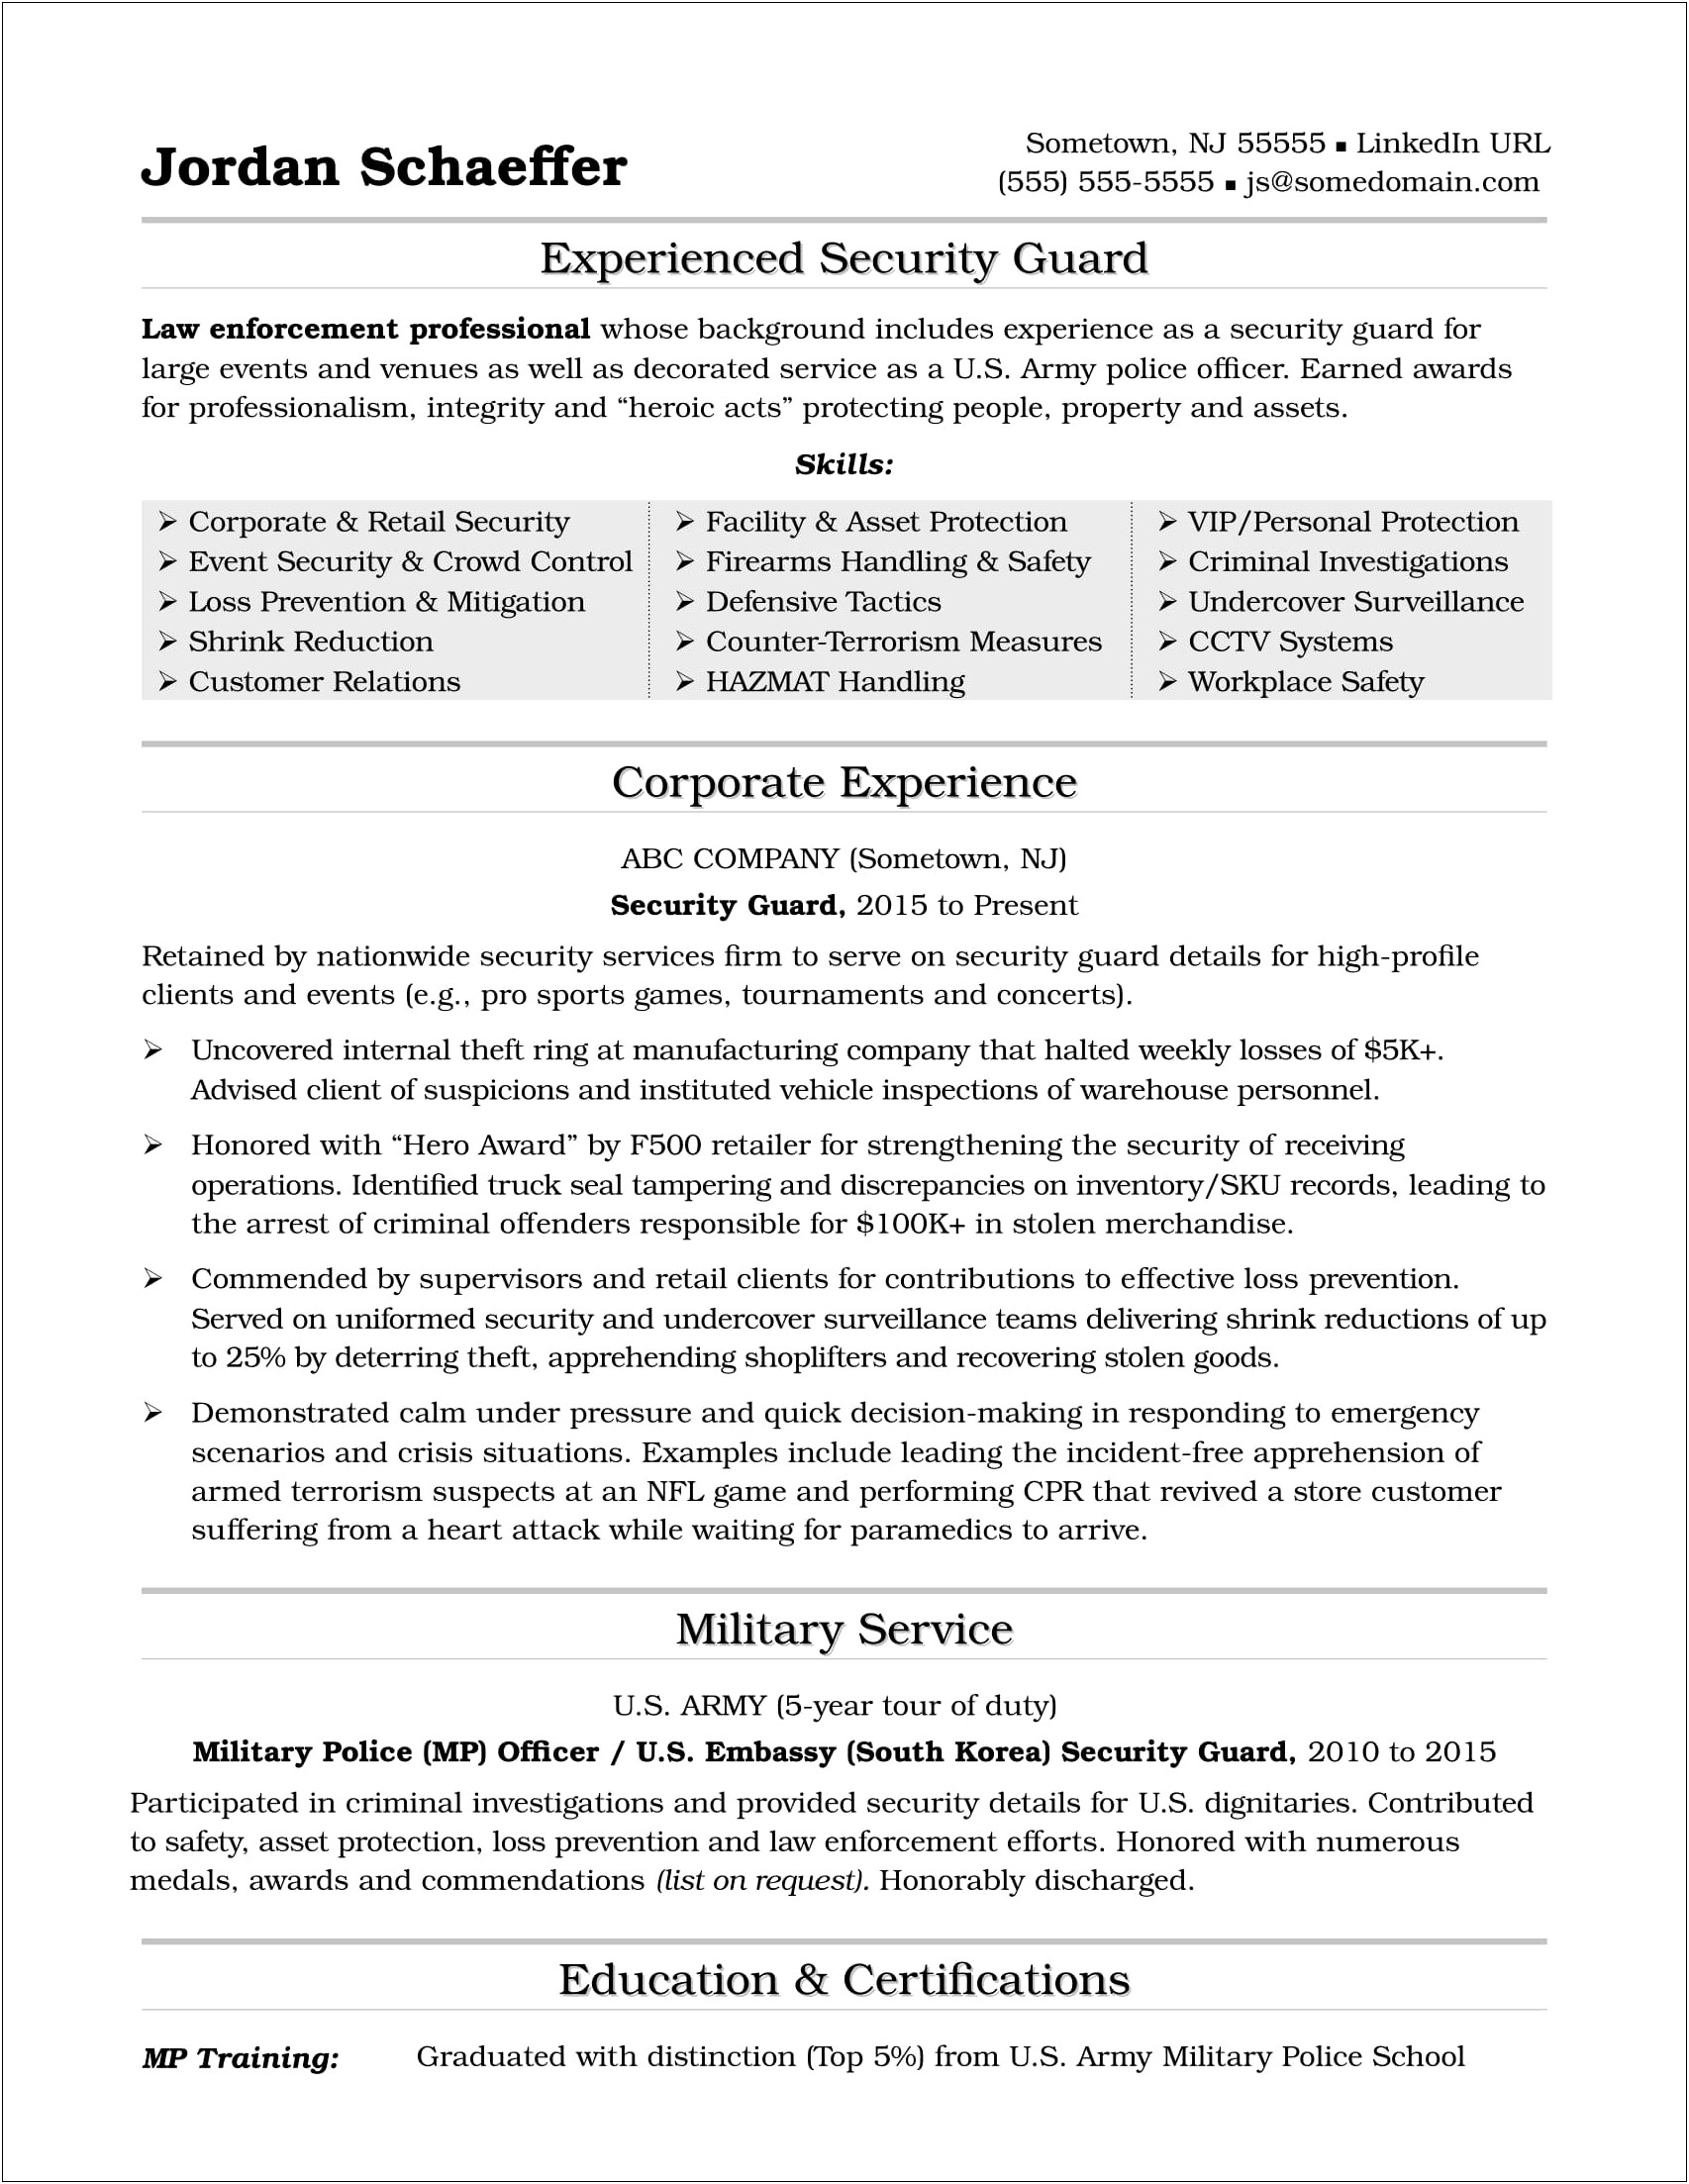 Sample Security Officer Resume Objective